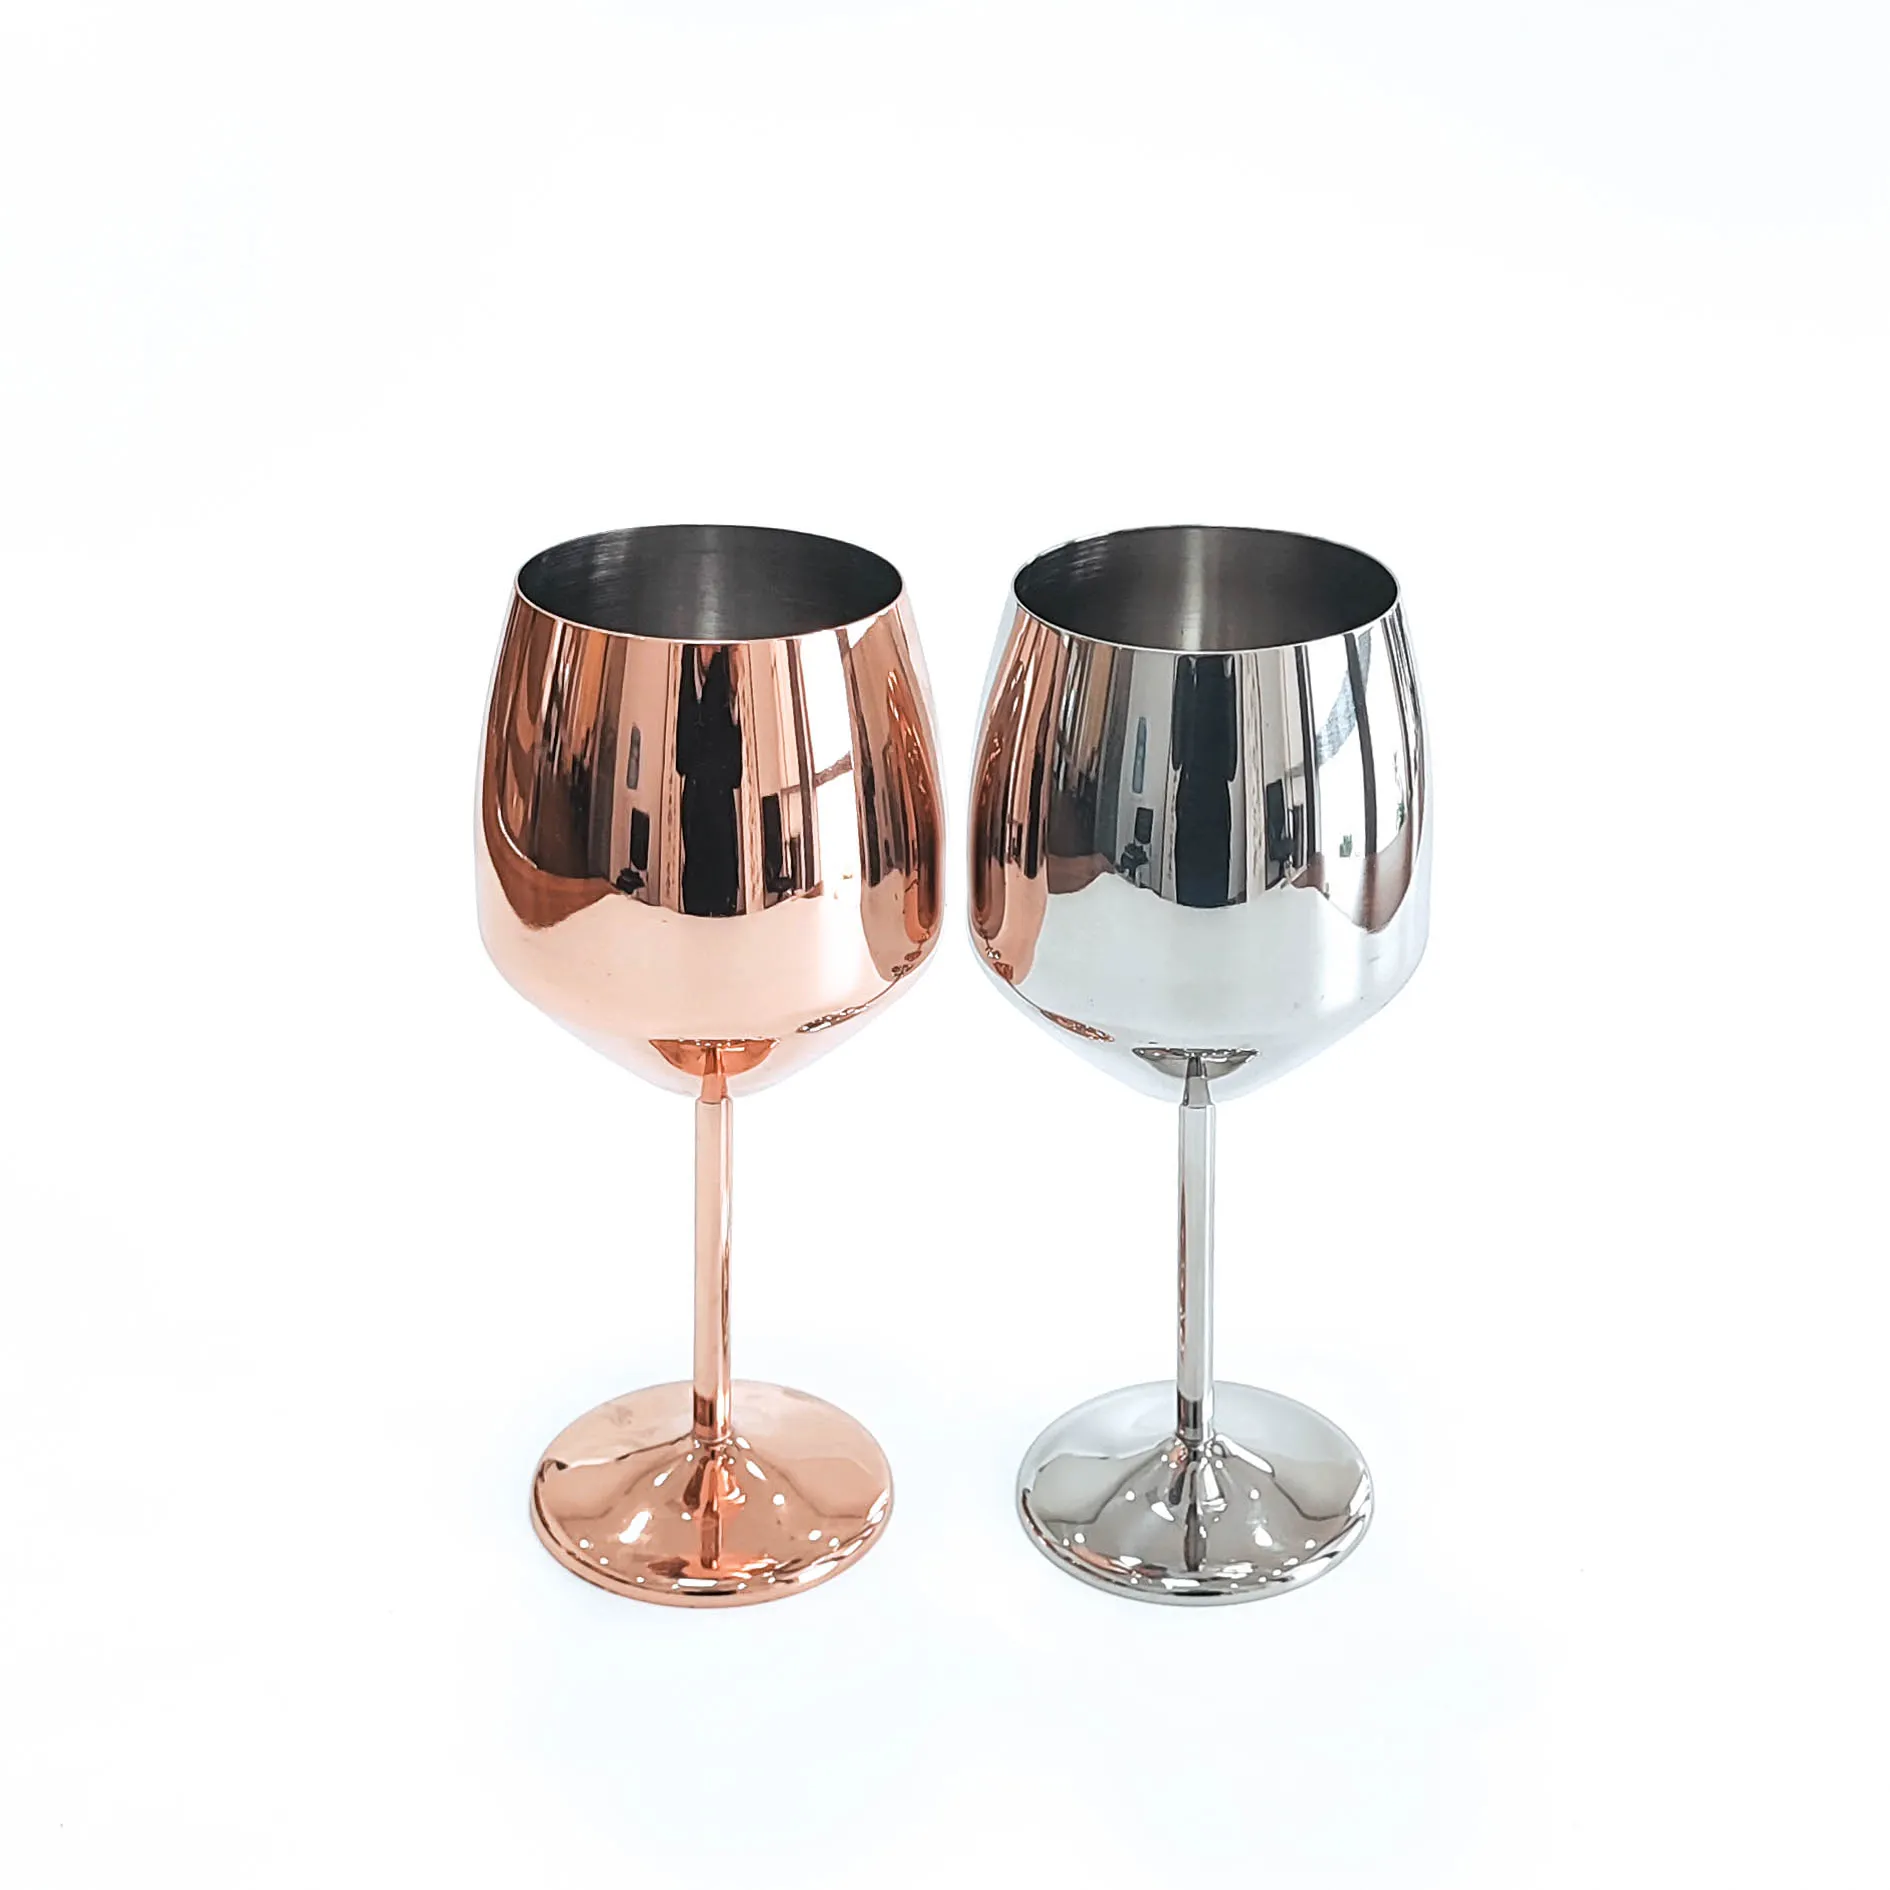 Sustainable Stainless Steel Wine Glass Martini Cup Cocktail Cup Goblet Wine Glasses Provided Tissue Paper UNION Shiny Polish